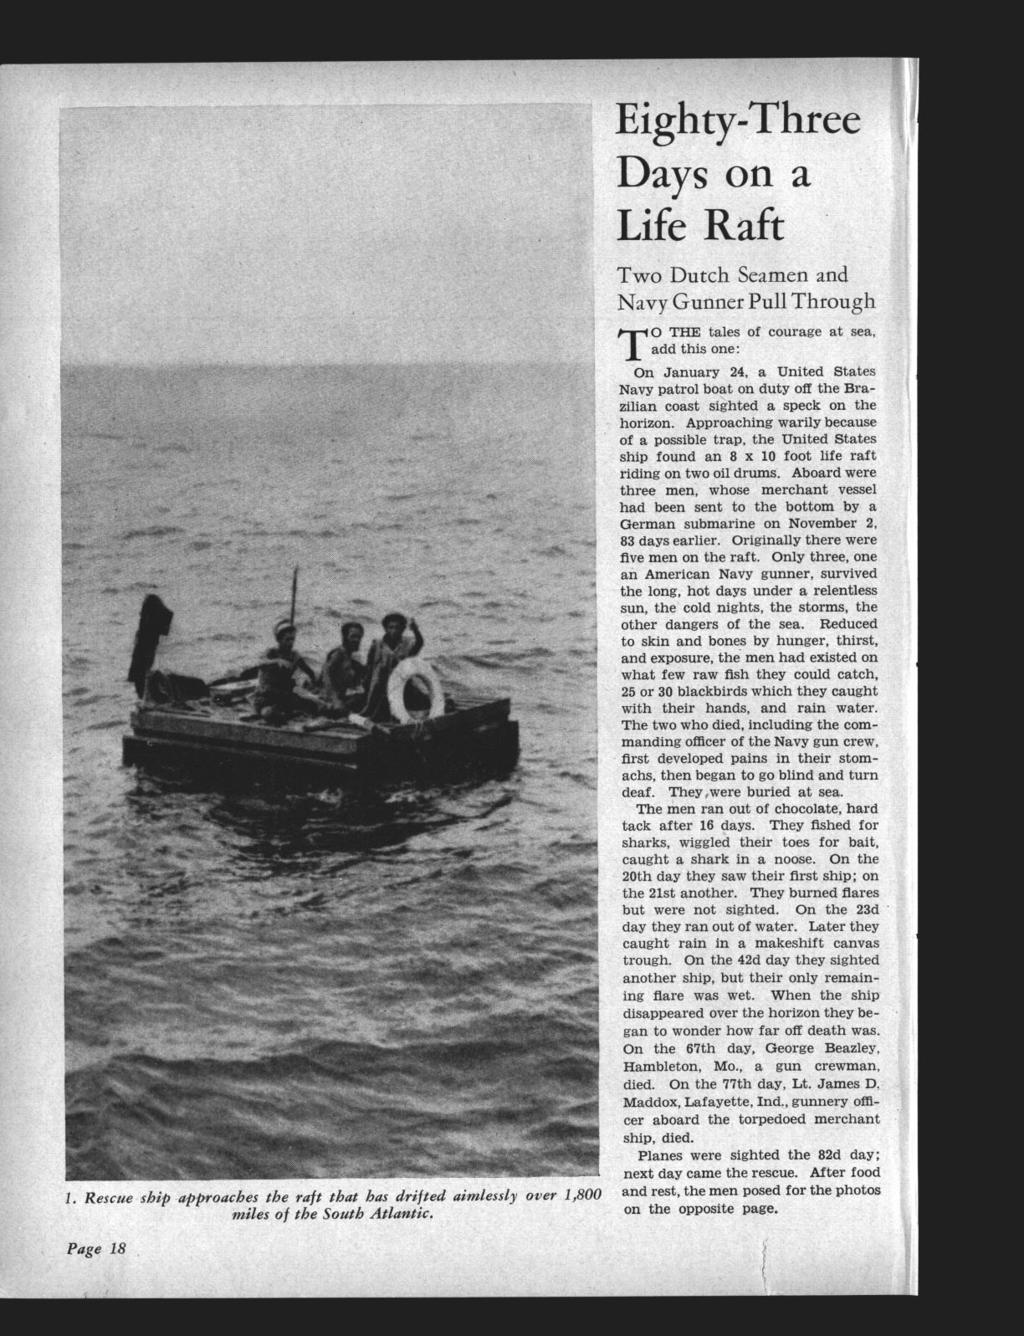 1. Rescue ship pproches the rft tht hs drifted imlessly ouer 1,800 miles of the South Atlmtic.